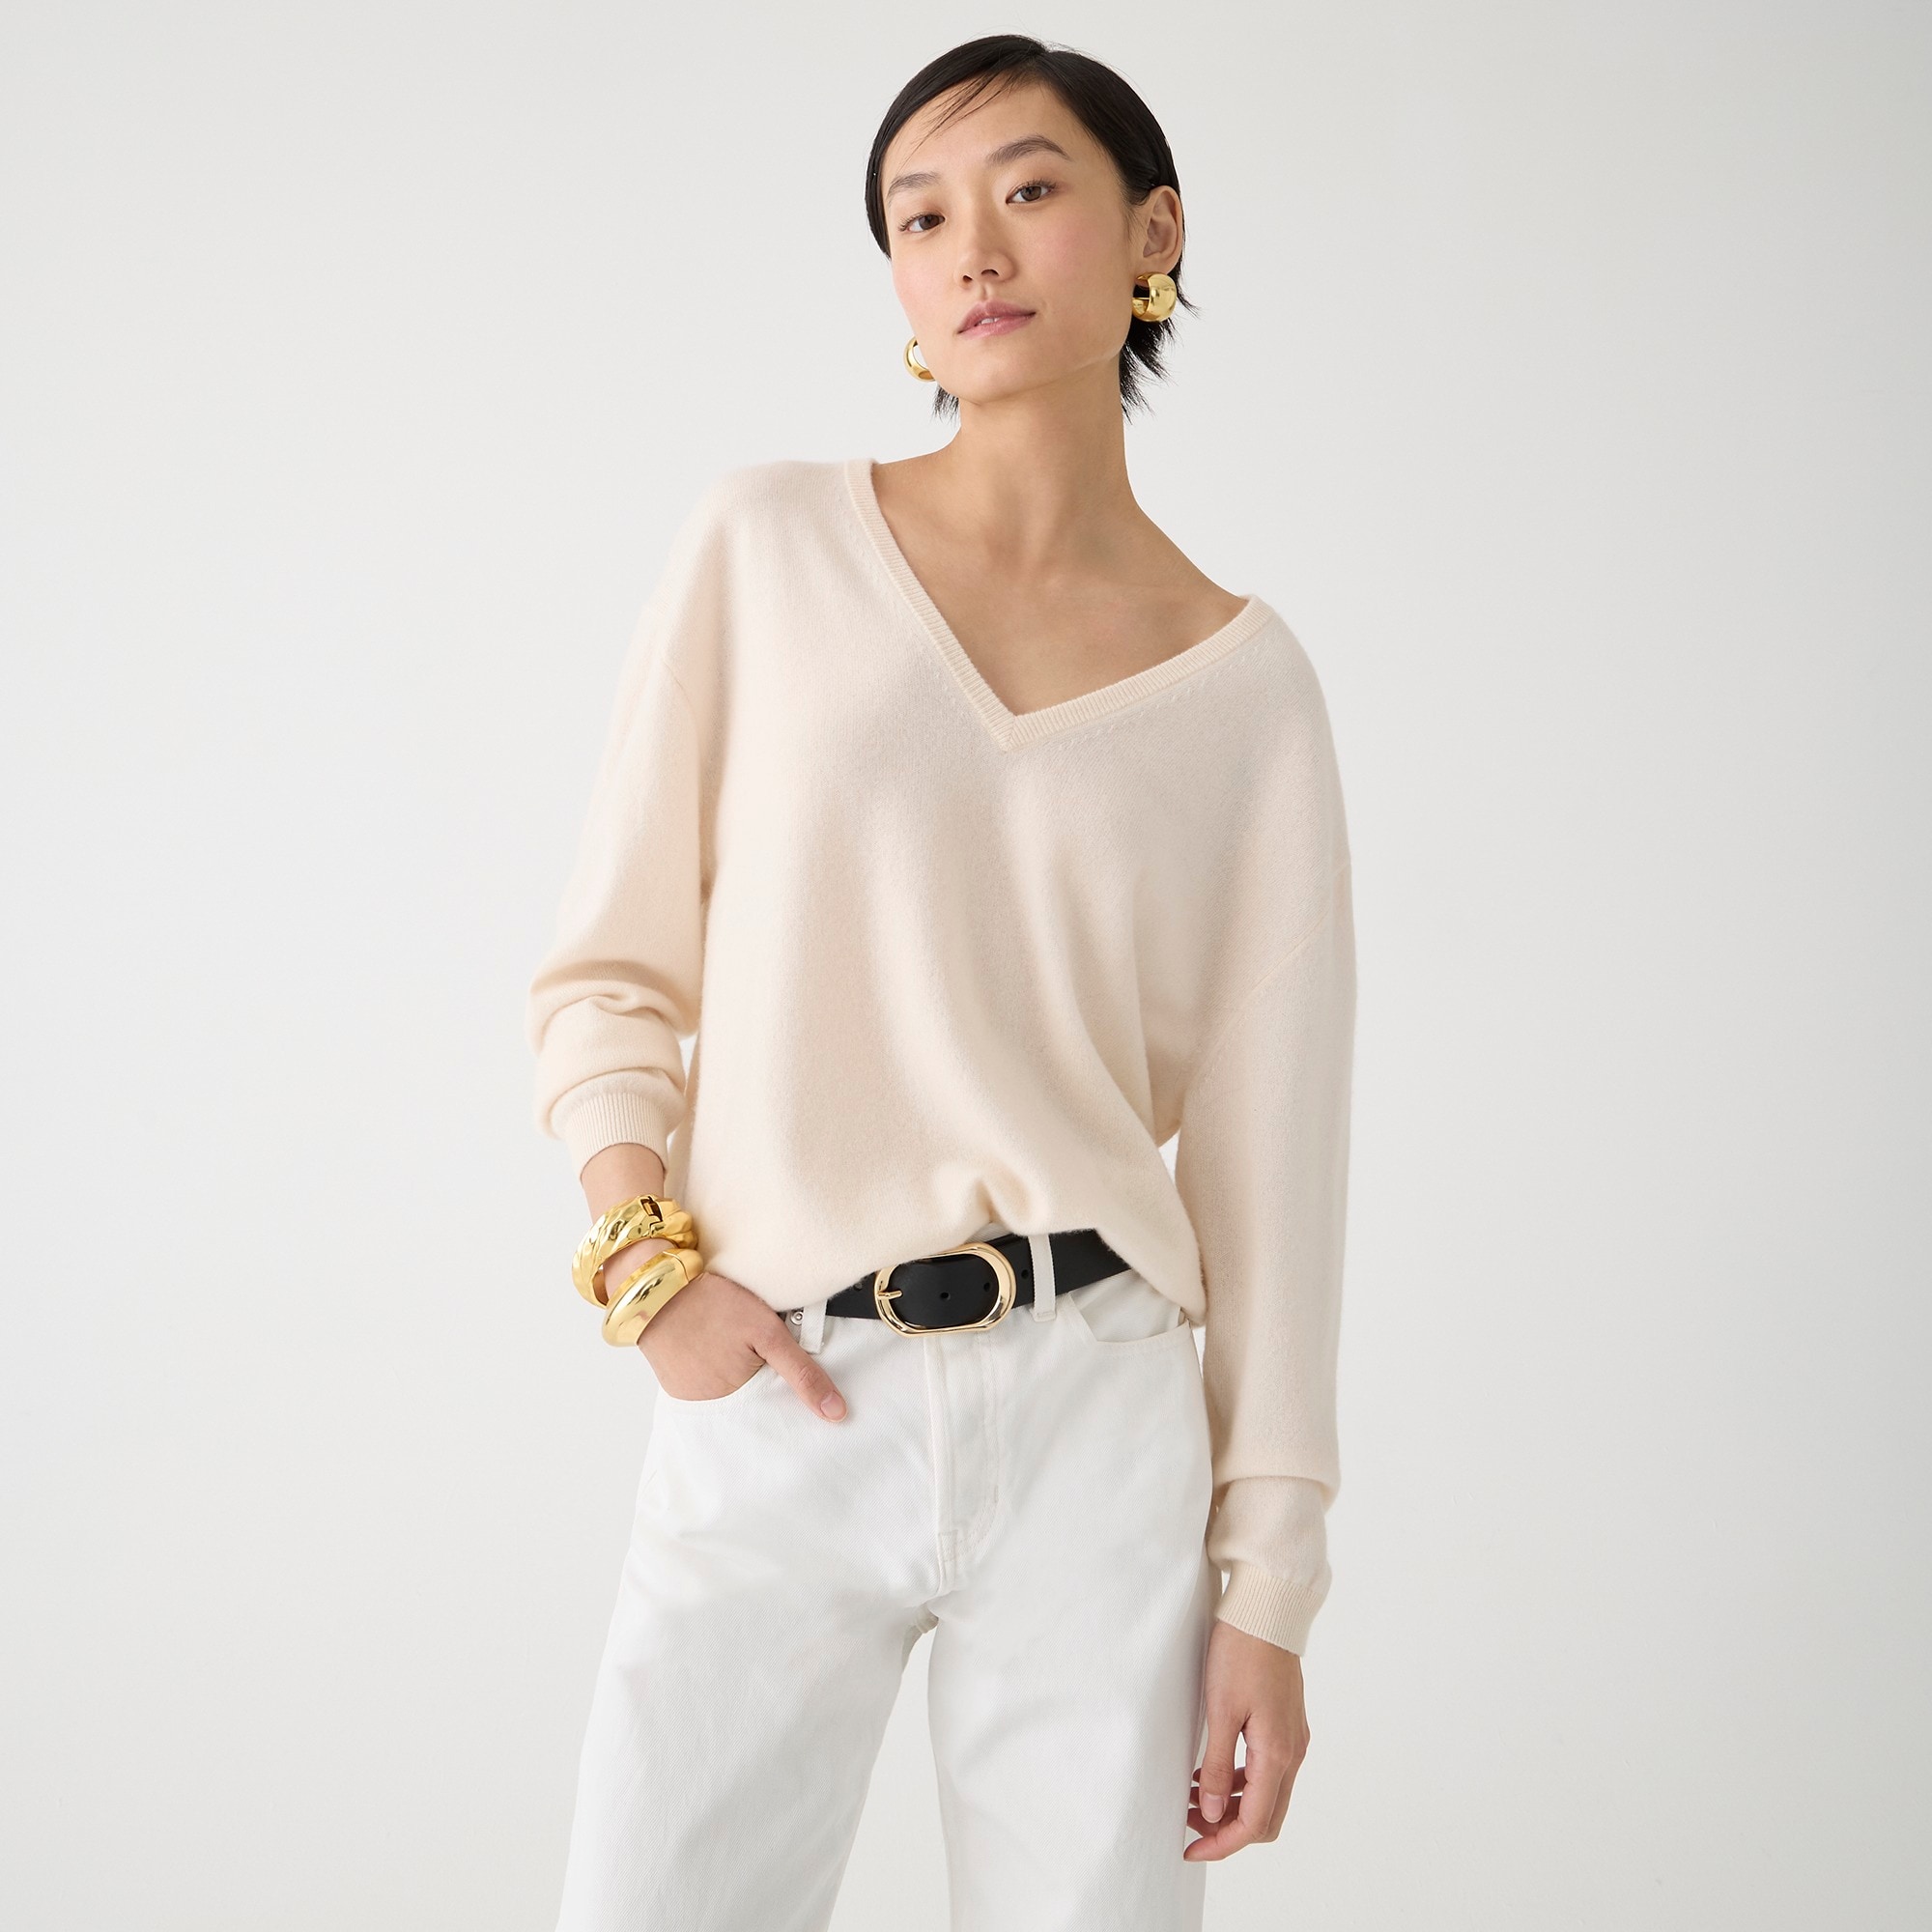 The $50 Cashmere V-Neck Sweater